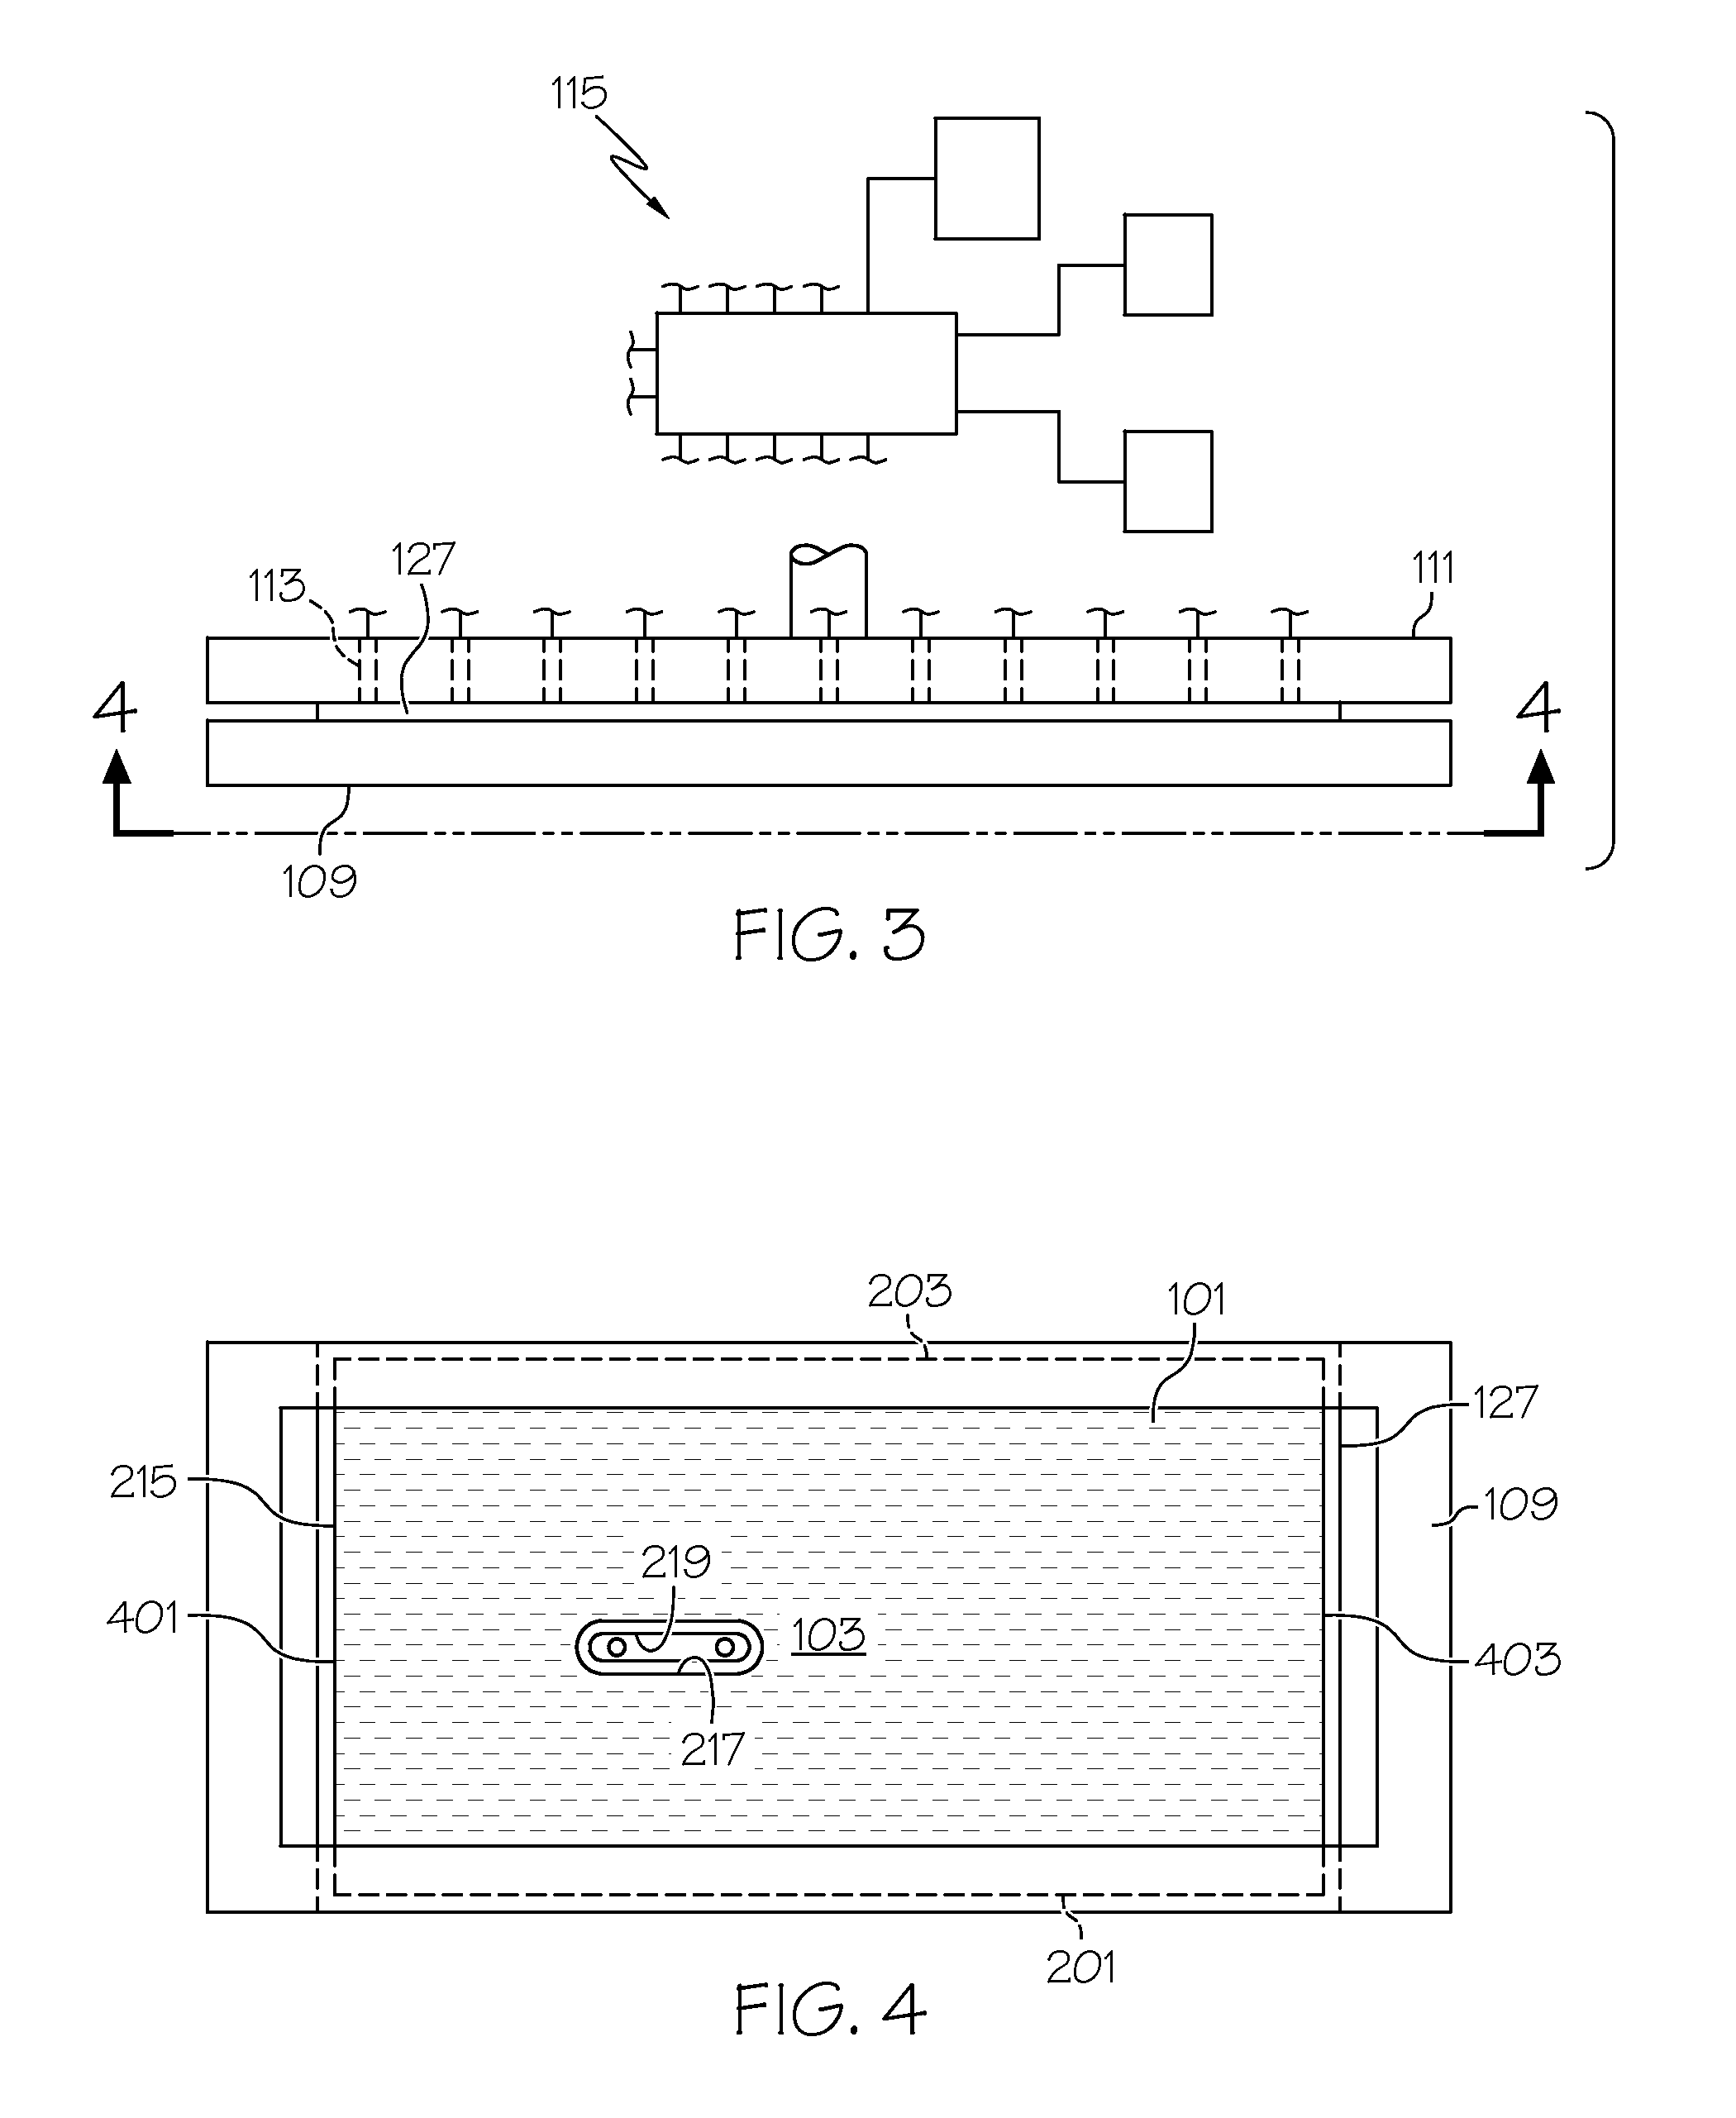 Methods of applying a layer of material to a non-planar glass sheet